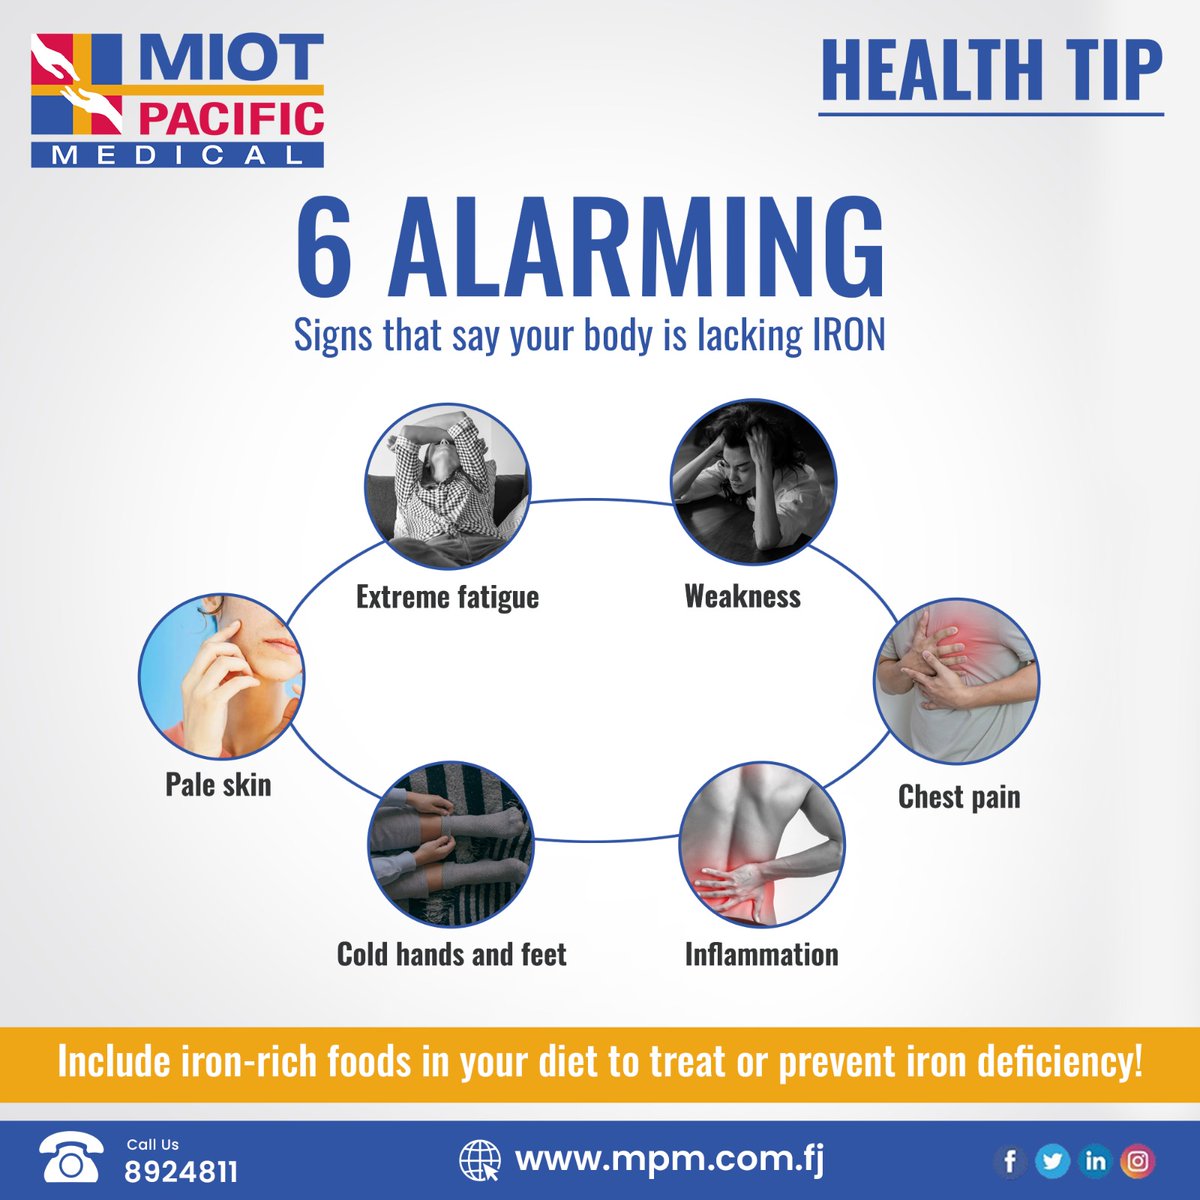 Low levels of iron can indicate that you might have iron-deficiency anemia.
Seek medical advice from our experienced doctors at 8924811, or book at mpm.com.fj
#Healthcheckup #Healthtip #Health #Healthtipoftheday #healthplan #healthcare #iron #MIOTPacificMedical